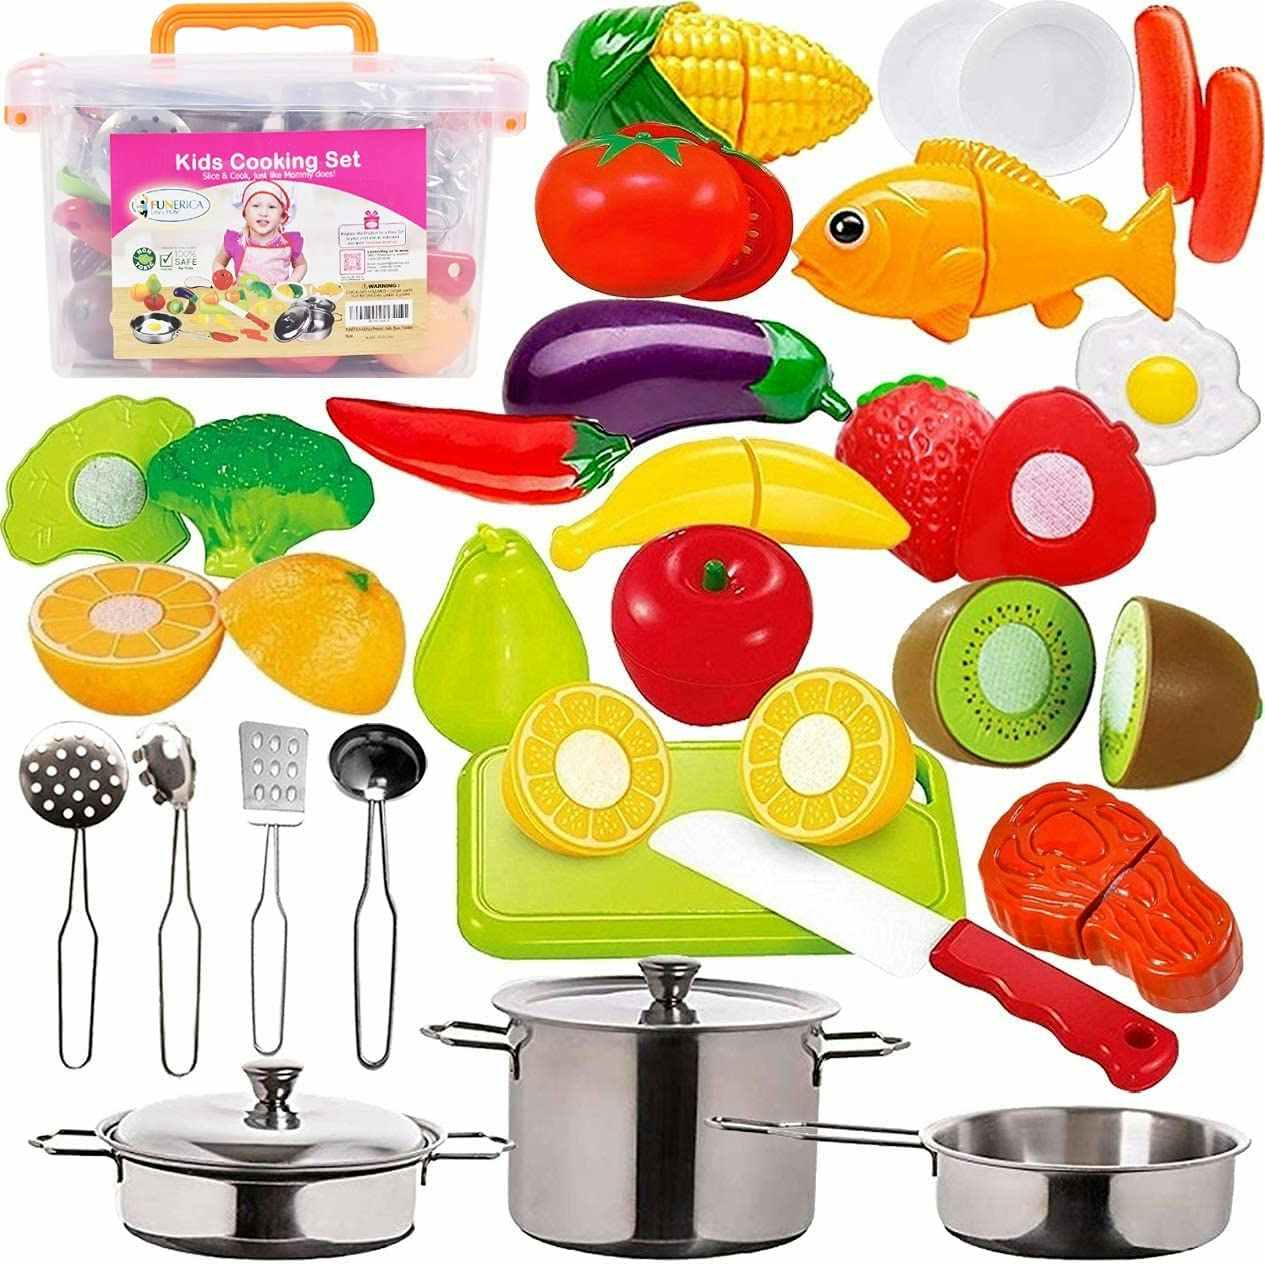 A Funerica Pretend Play Food Set with pots, pans, utensils, and fake food on a white background.